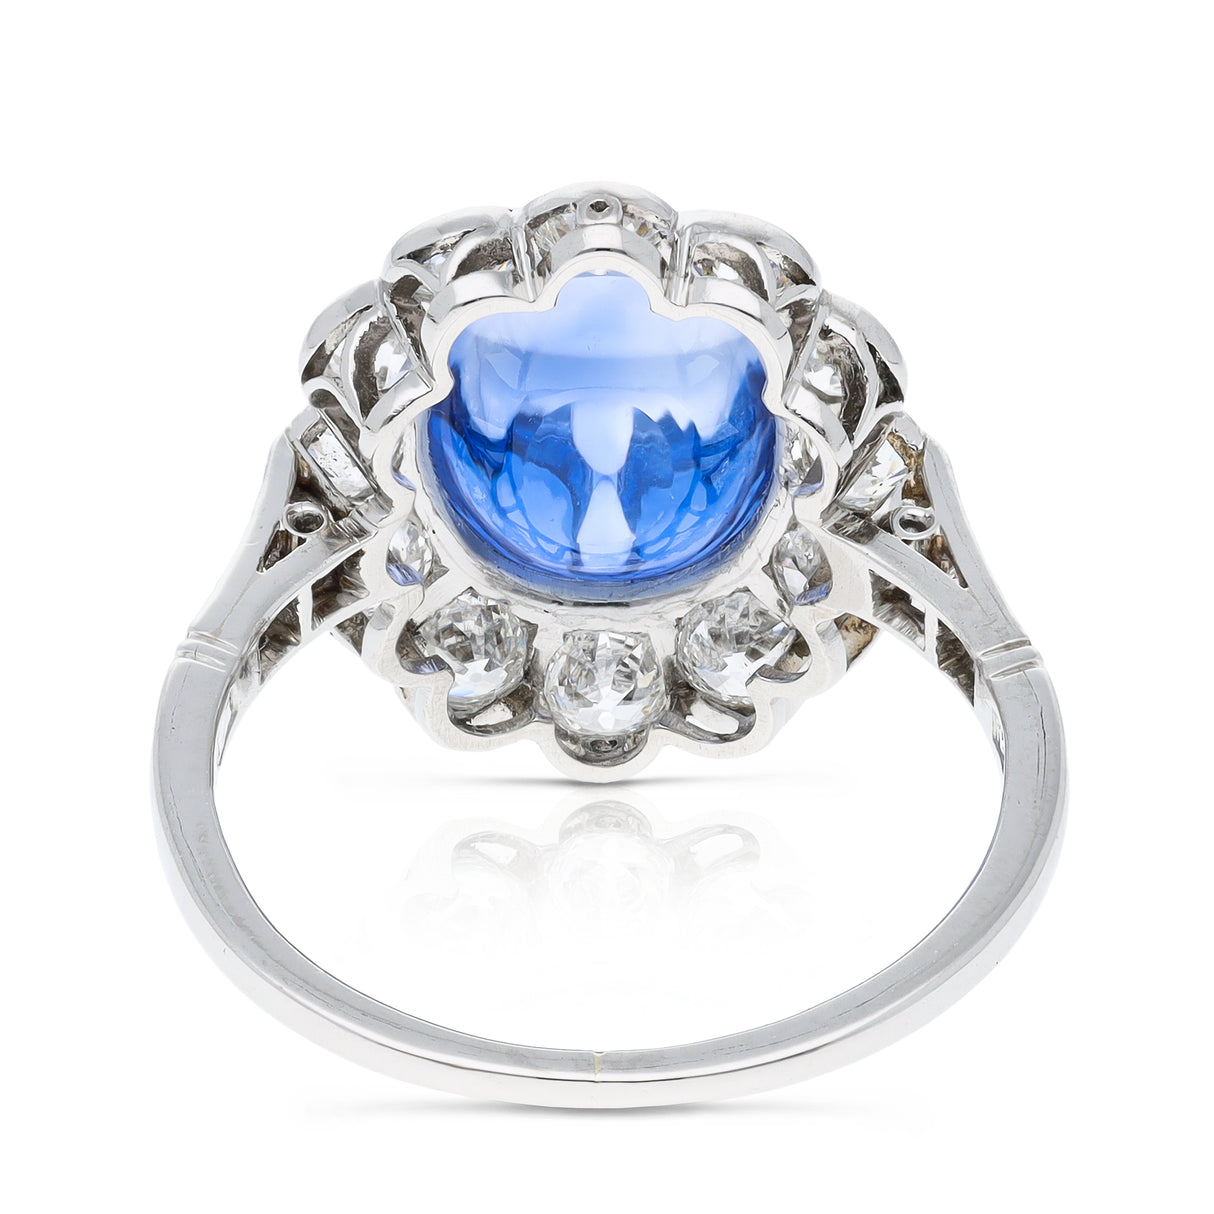 cabochon sapphire and diamond cluster ring set in platinum, back view.